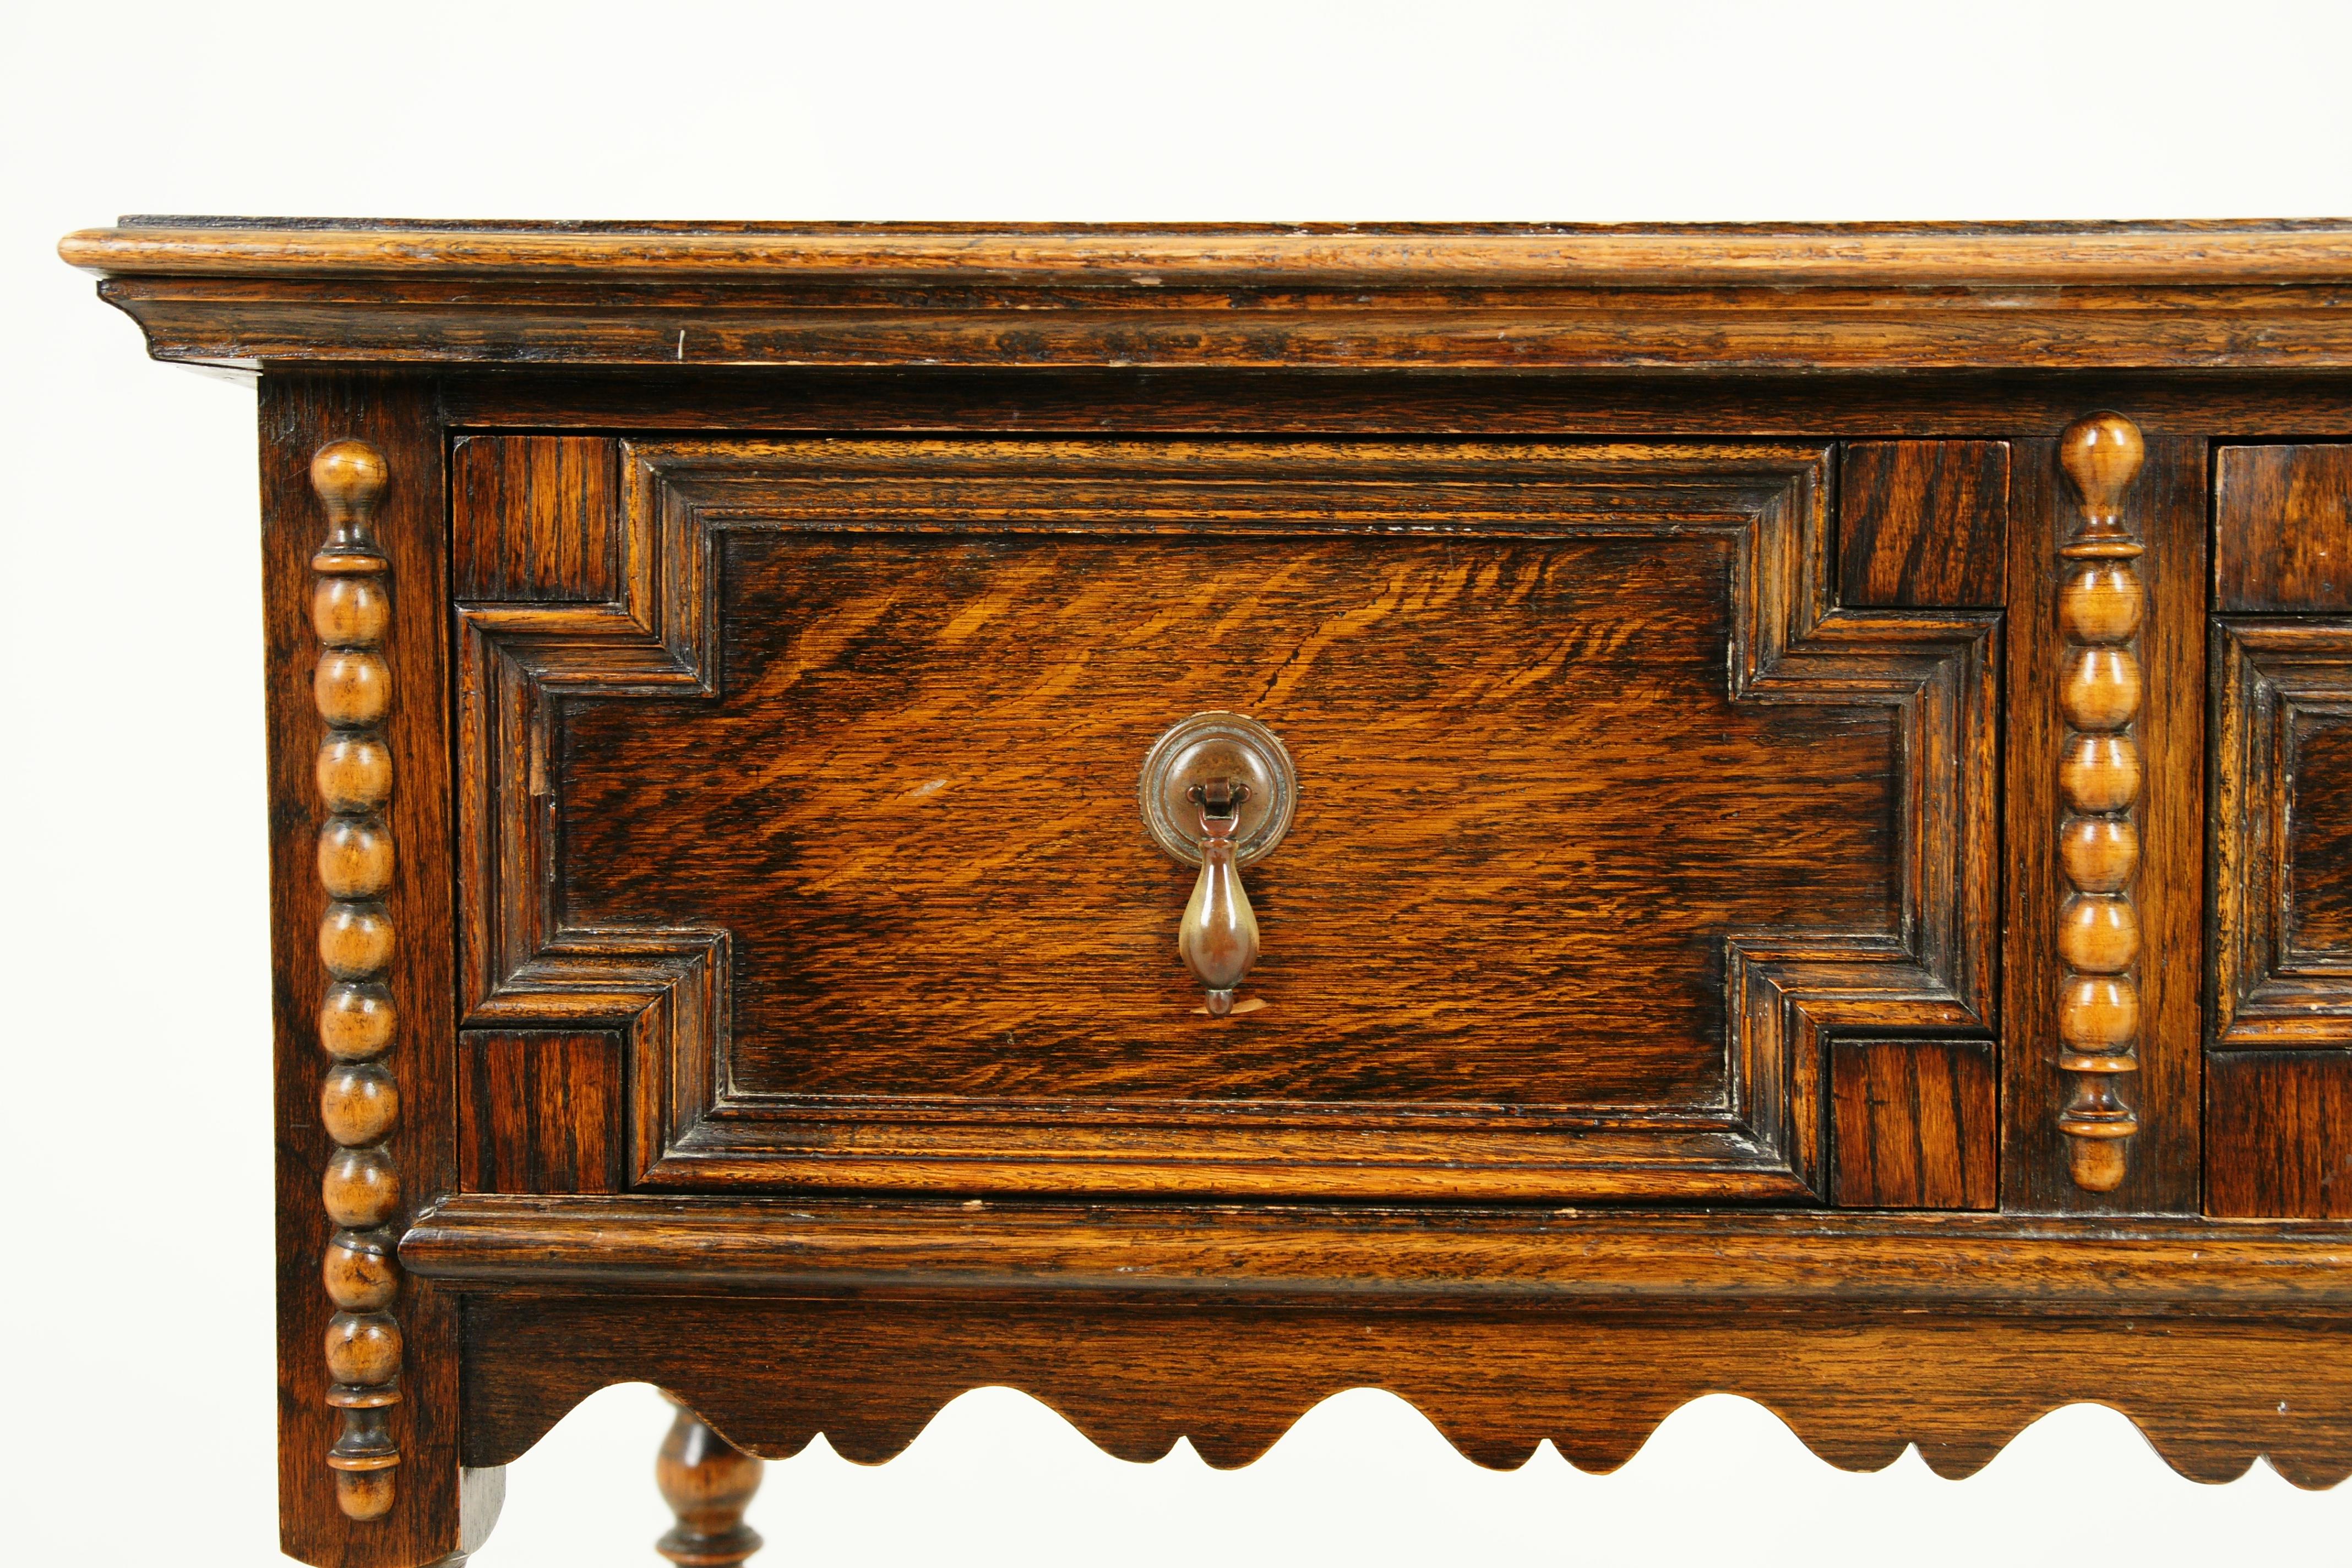 Antique tiger oak hall table, serving table, Scotland 1910, B2341

Scotland 1910
Solid oak
Original finish
Rectangular moulded top
Pair of paneled geometric drawers with original brass handles
Beading on the front sides
Shaped apron